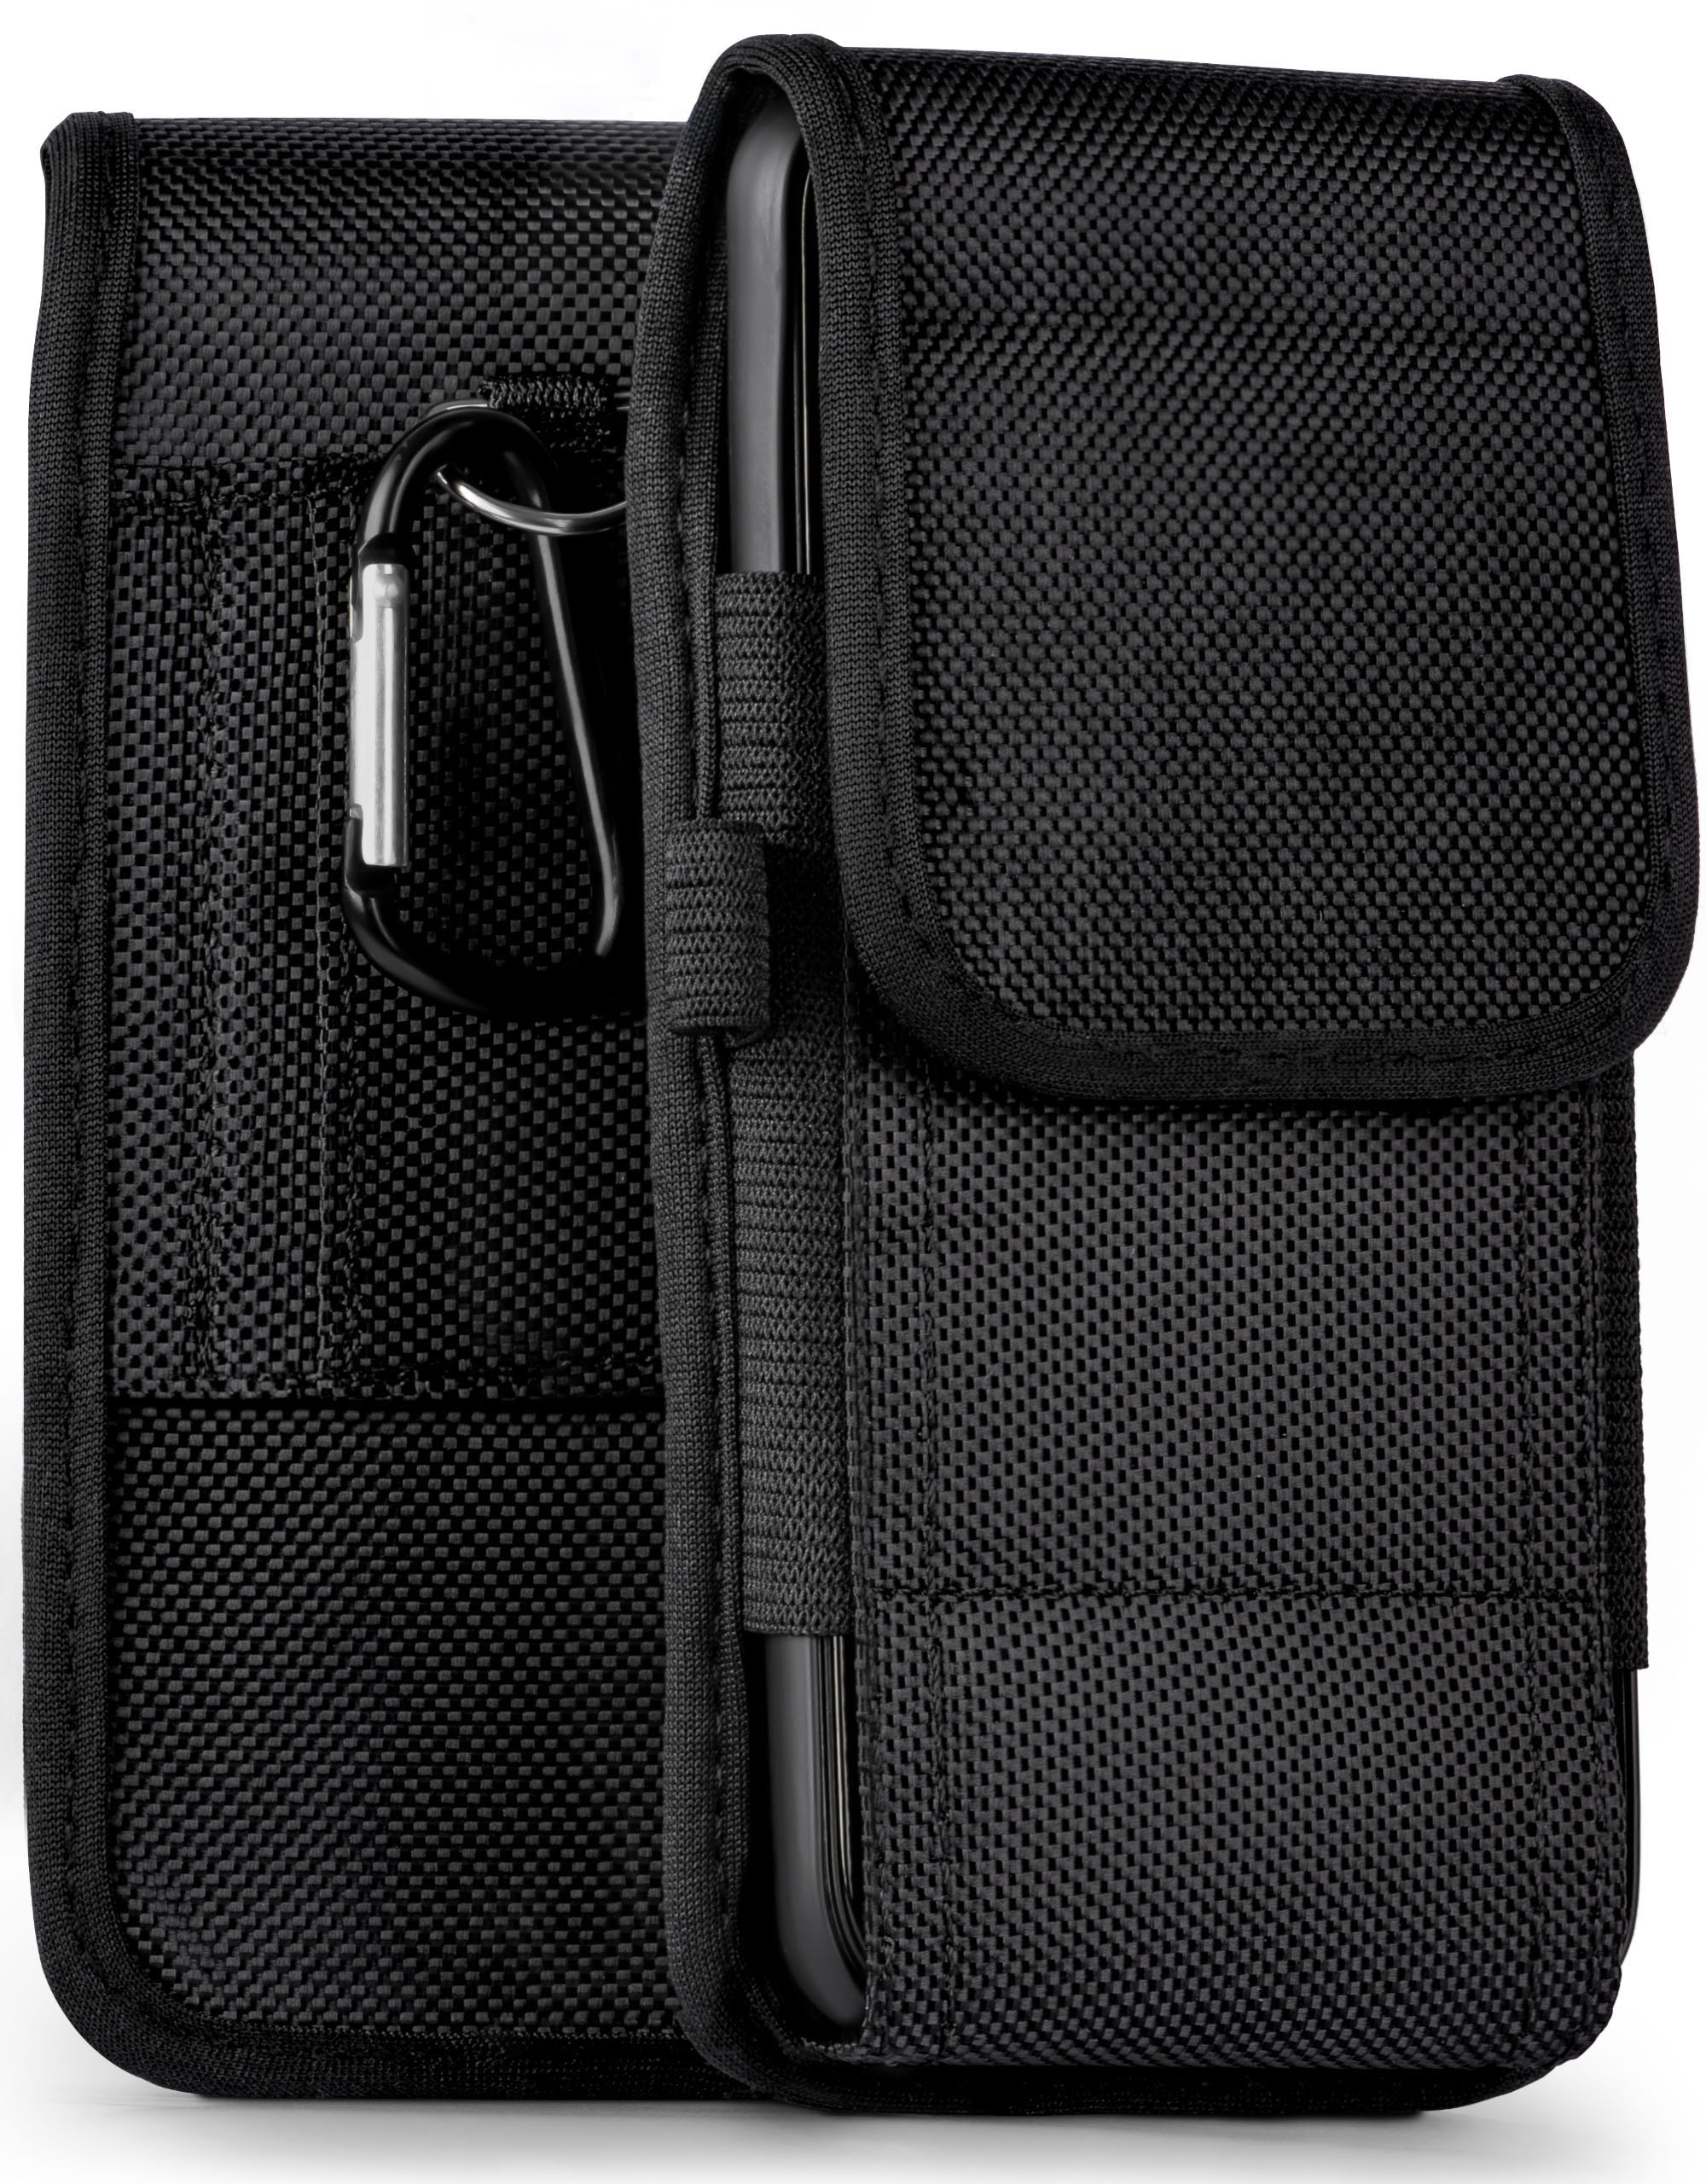 Trail MOEX Note Case, Hafury, Holster, Agility 10,